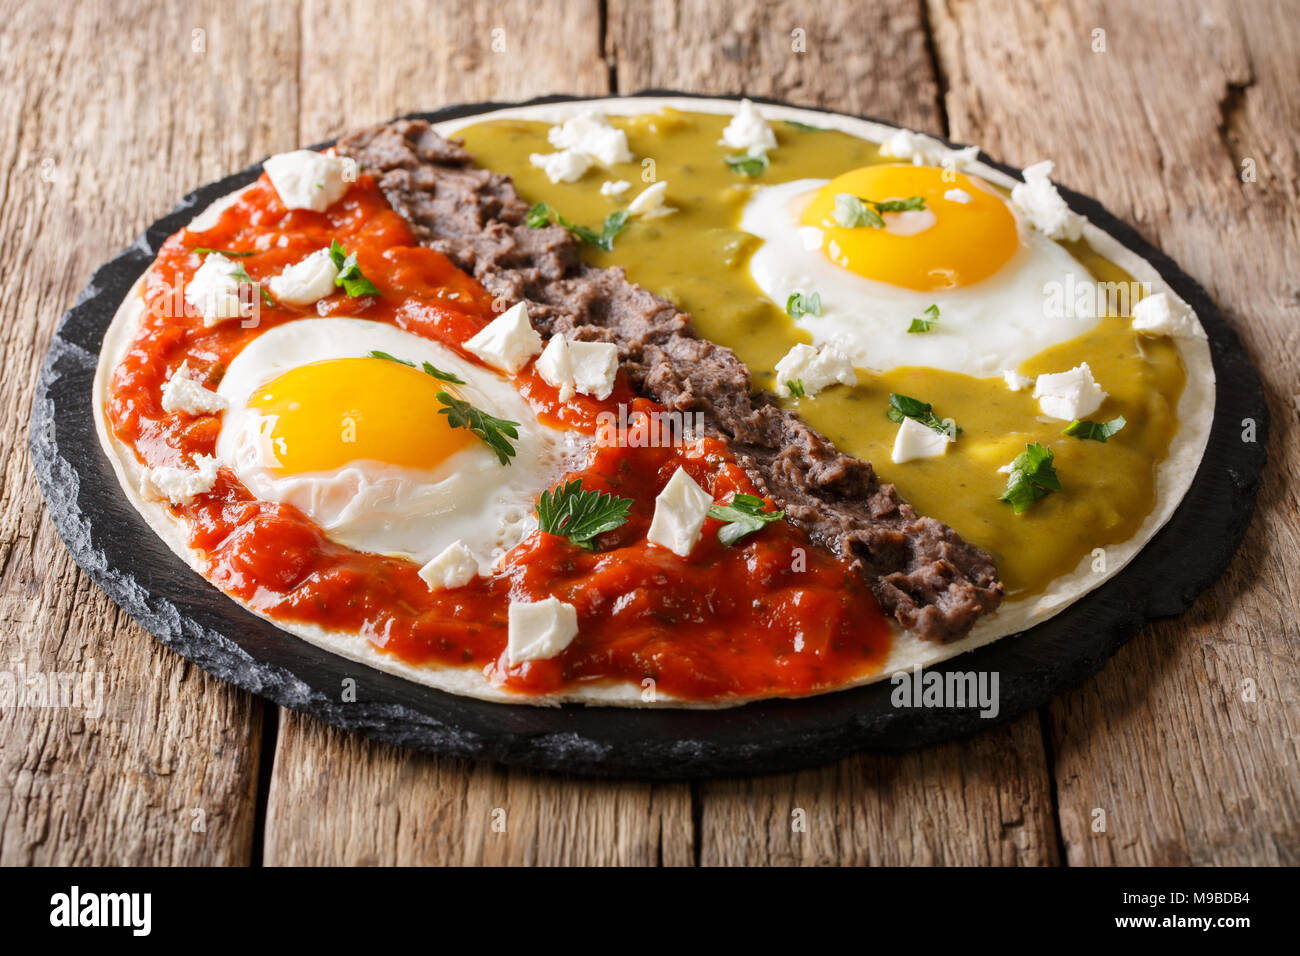 Mexican fried huevos divorciados eggs with salsa verde and roja, cheese, black beans on a tortilla close-up on a table. horizontal Stock Photo